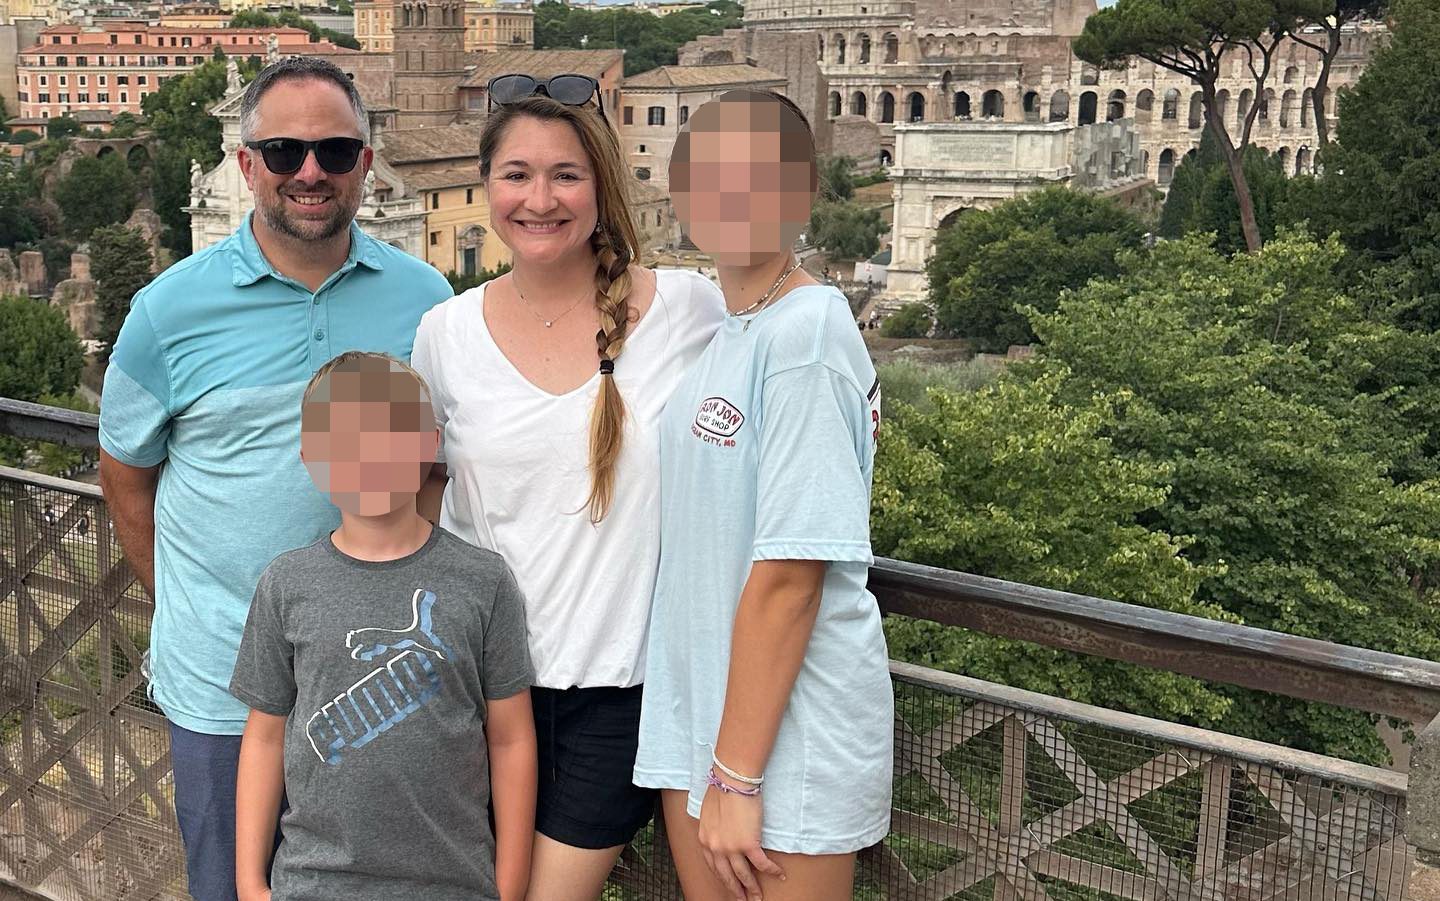 Vaughan with her husband, Mike White, and their two children in Rome. The family was visiting Italy from New York